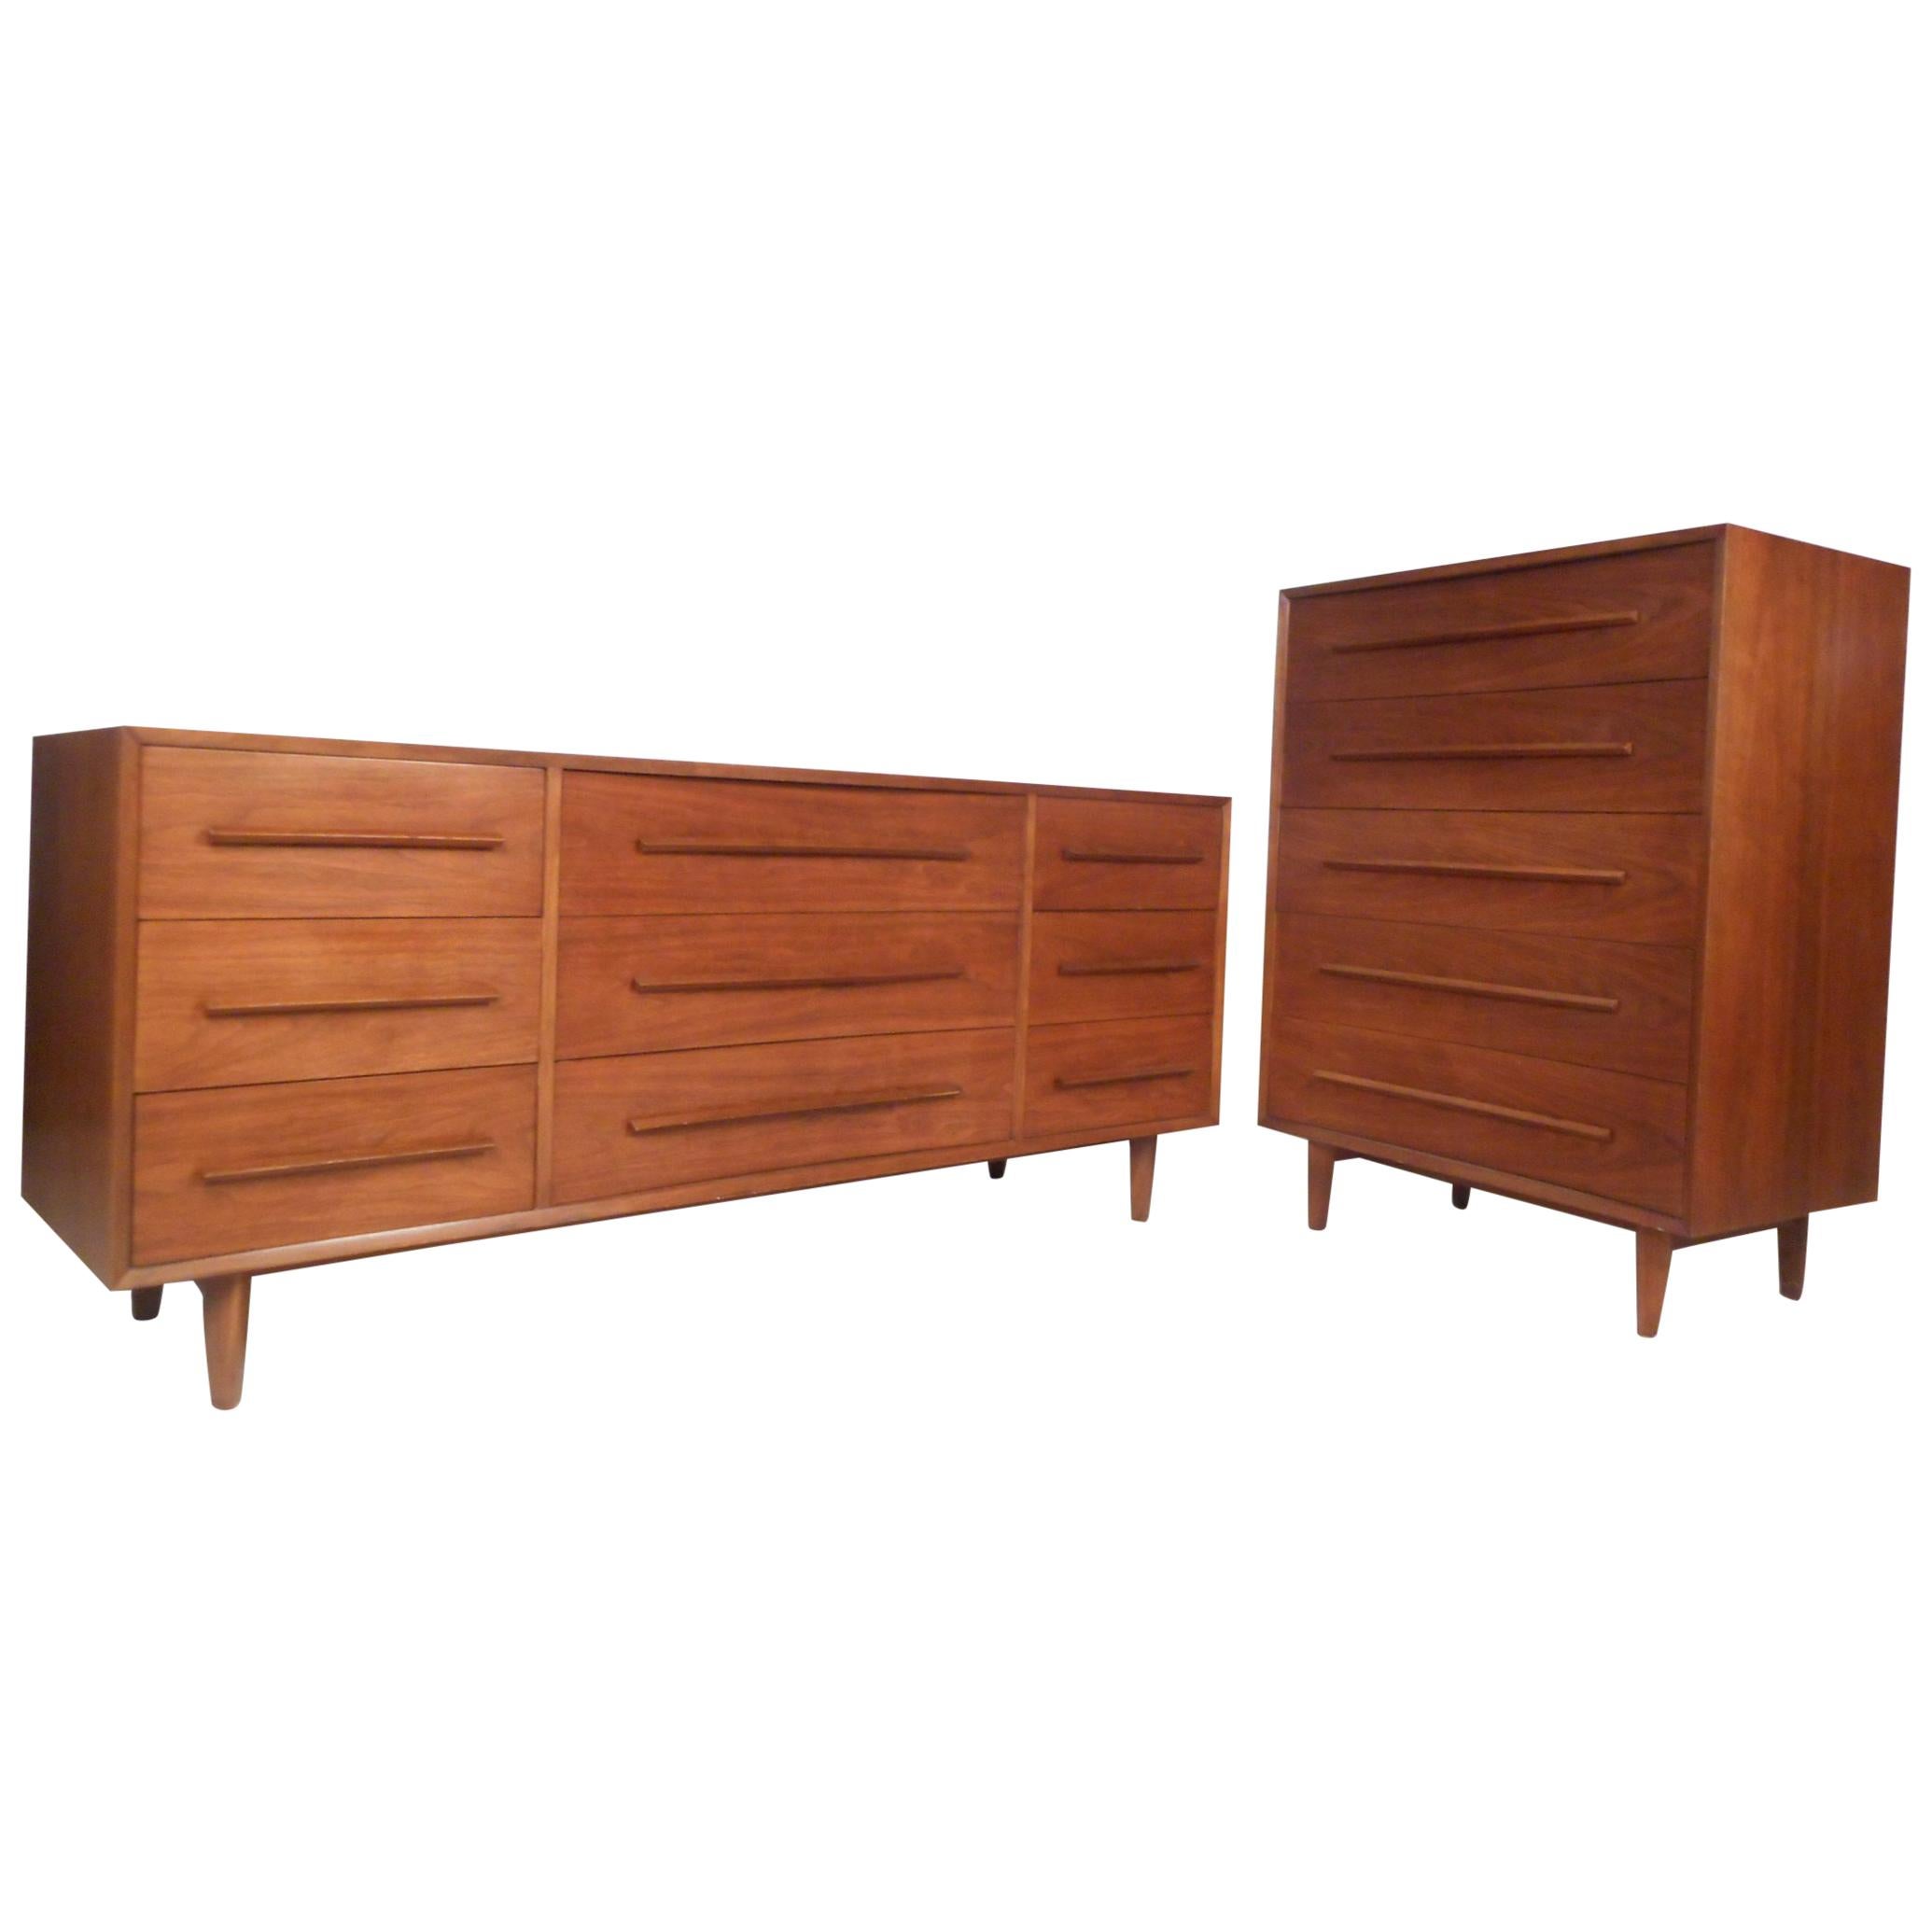 This beautiful pair of vintage modern bedroom dressers featured in the style of George Nakashima, offer unique concave drawer fronts with beautifully sculpted drawer pulls. This set includes a matching pair of nightstands. An impressive set that